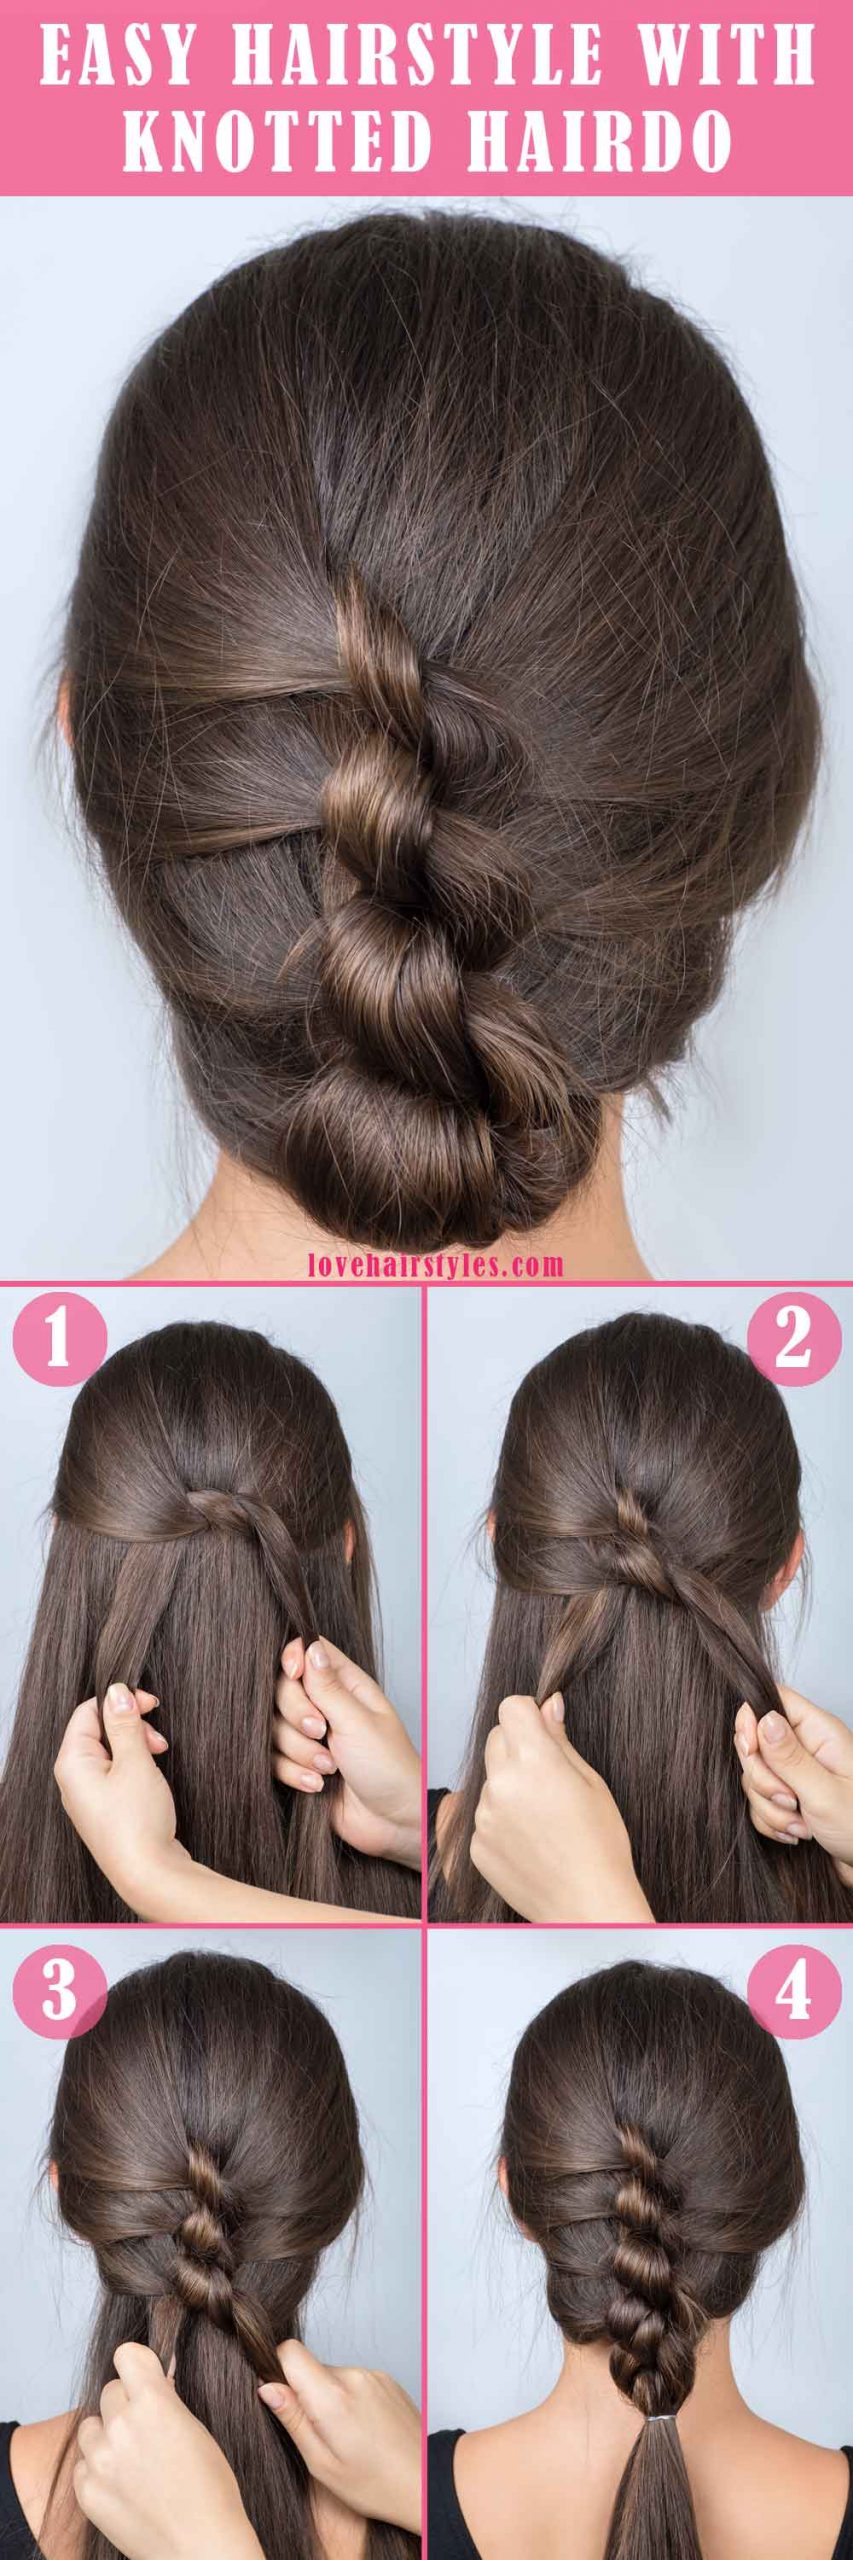 Hairstyle For Girls